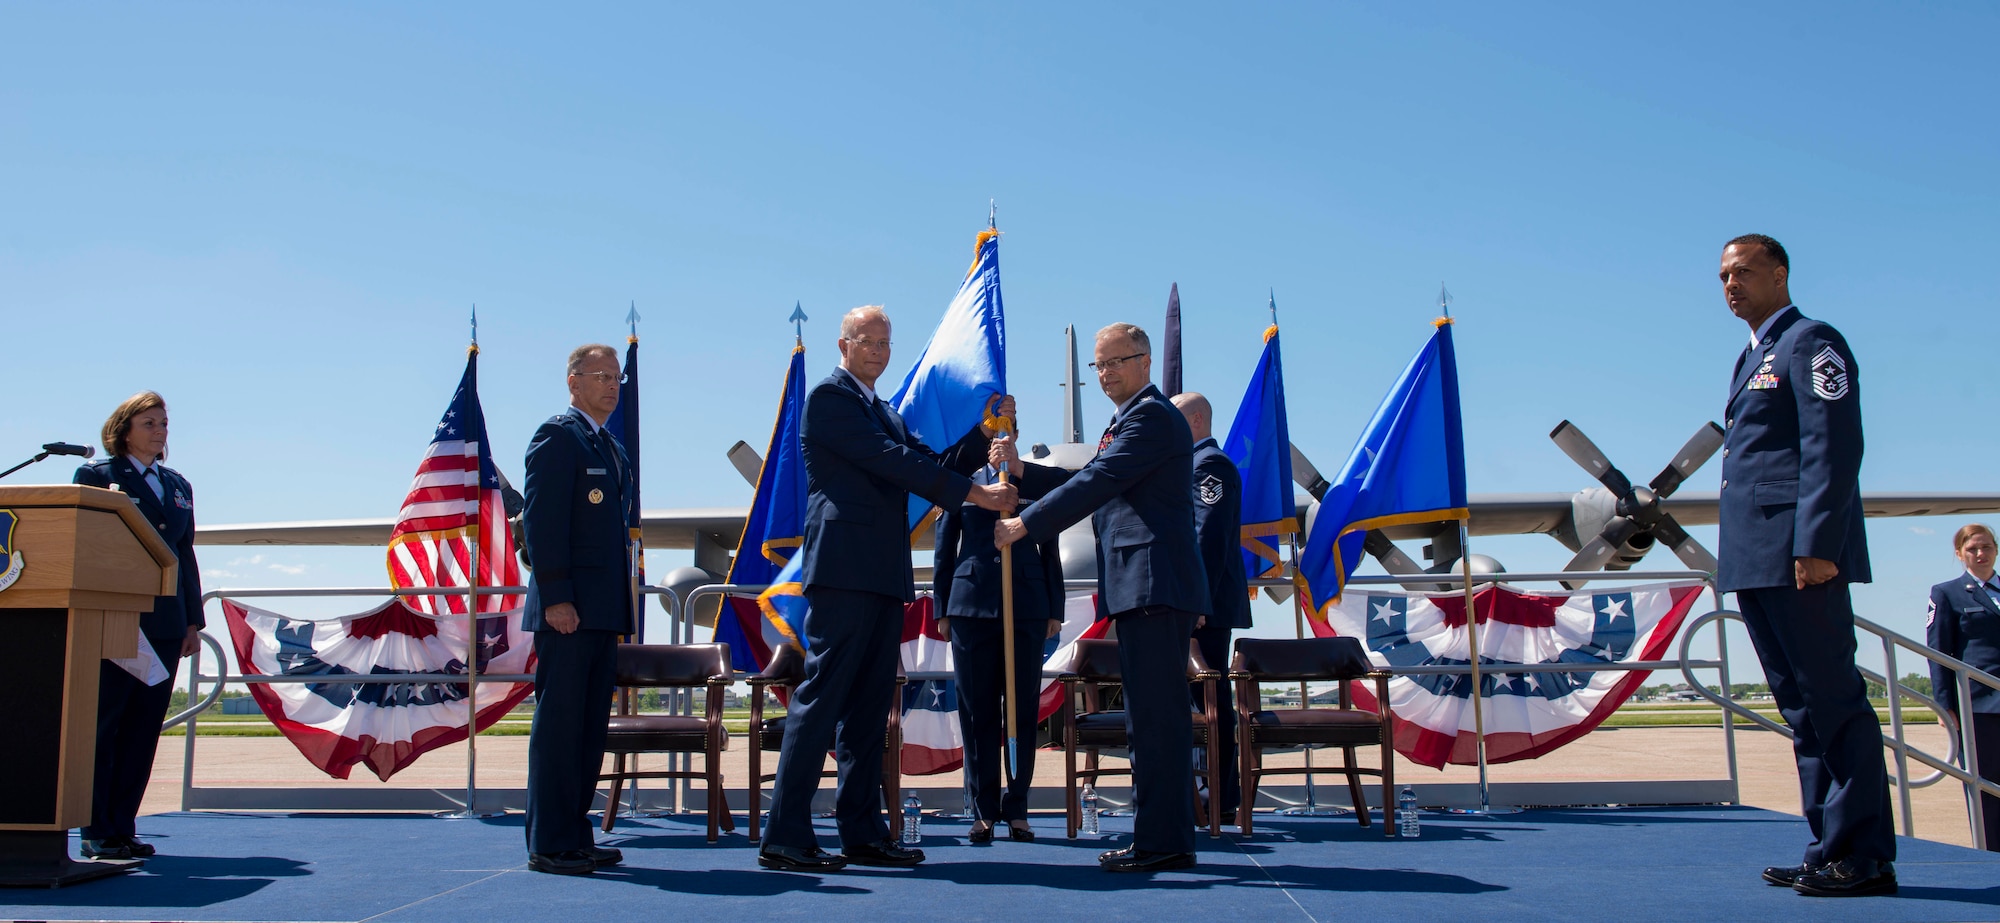 Col. Brian S. Bowman, 914th Air Refueling Wing Commander, relinquishes the 22nd Air Force flag to Brig. Gen. Steven B. Parker, 94th Airlift Wing Commander, Dobbins Air Reserve Base, GA, representing 22nd Air Force, during the Change of Mission Ceremony, June 3, 2017, Niagara Falls Air Reserve Station, N.Y. The Airlift Wing has been re-designated as an Air Refueling Wing, and as such, will fall under 4th Air Force moving forward. Under the new mission, the 914th will be flying the KC-135 Stratotanker. (U.S. Air Force photo by Tech. Sgt. Stephanie Sawyer) 